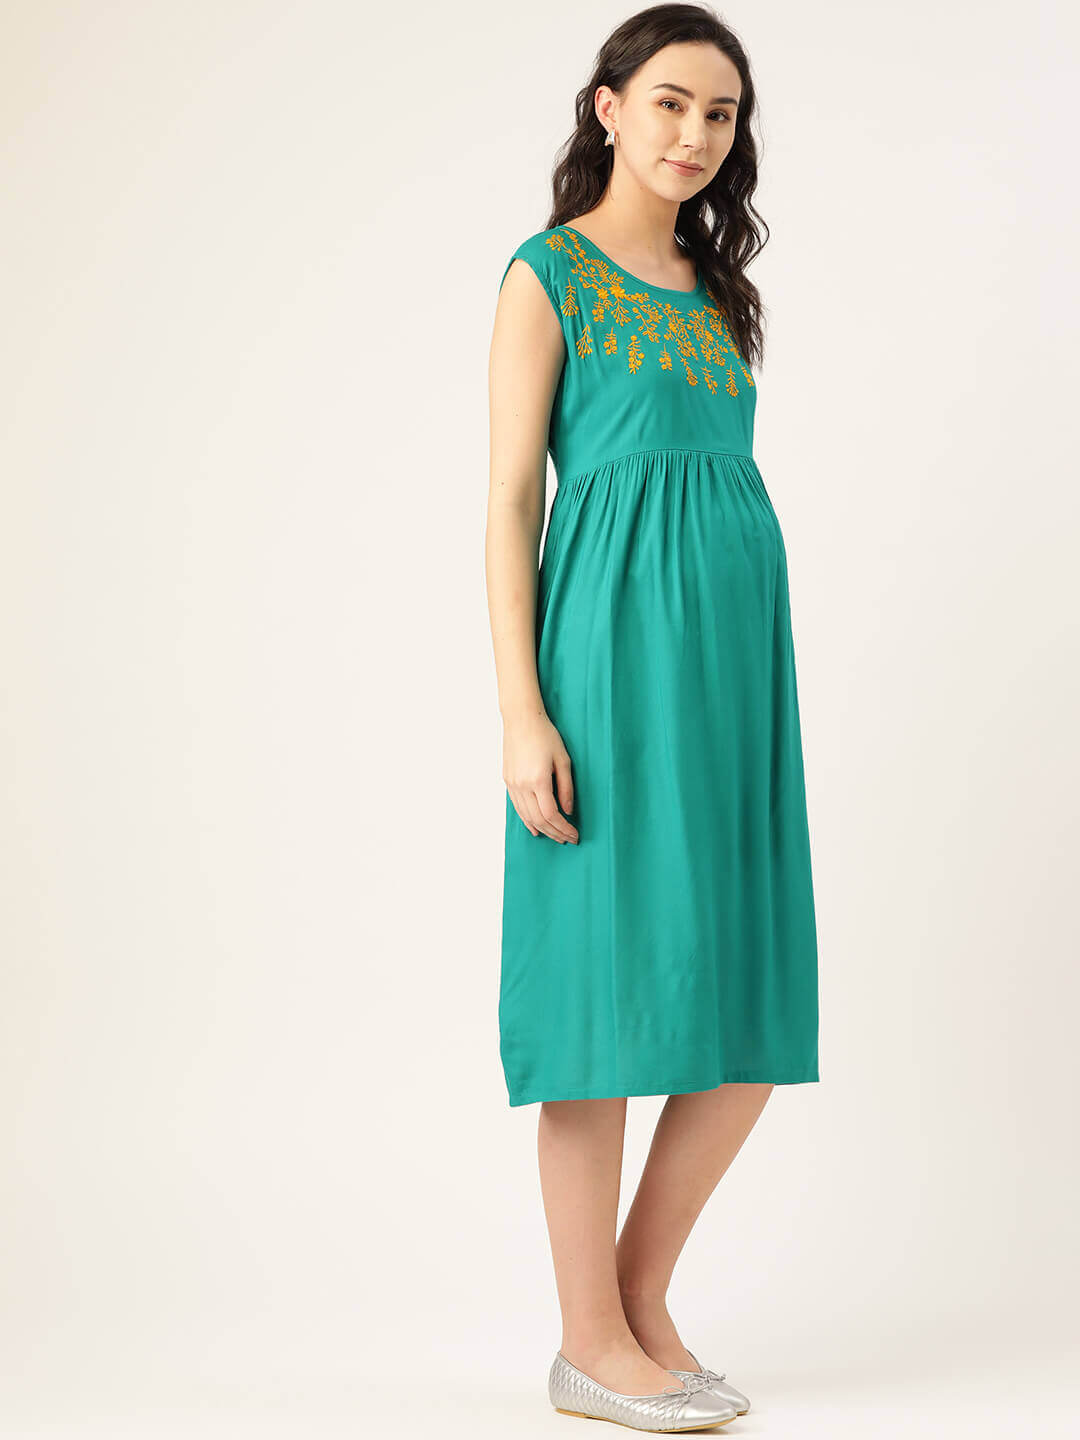 Women Maternity Dress With Embroidered Neckline And Nursing Access